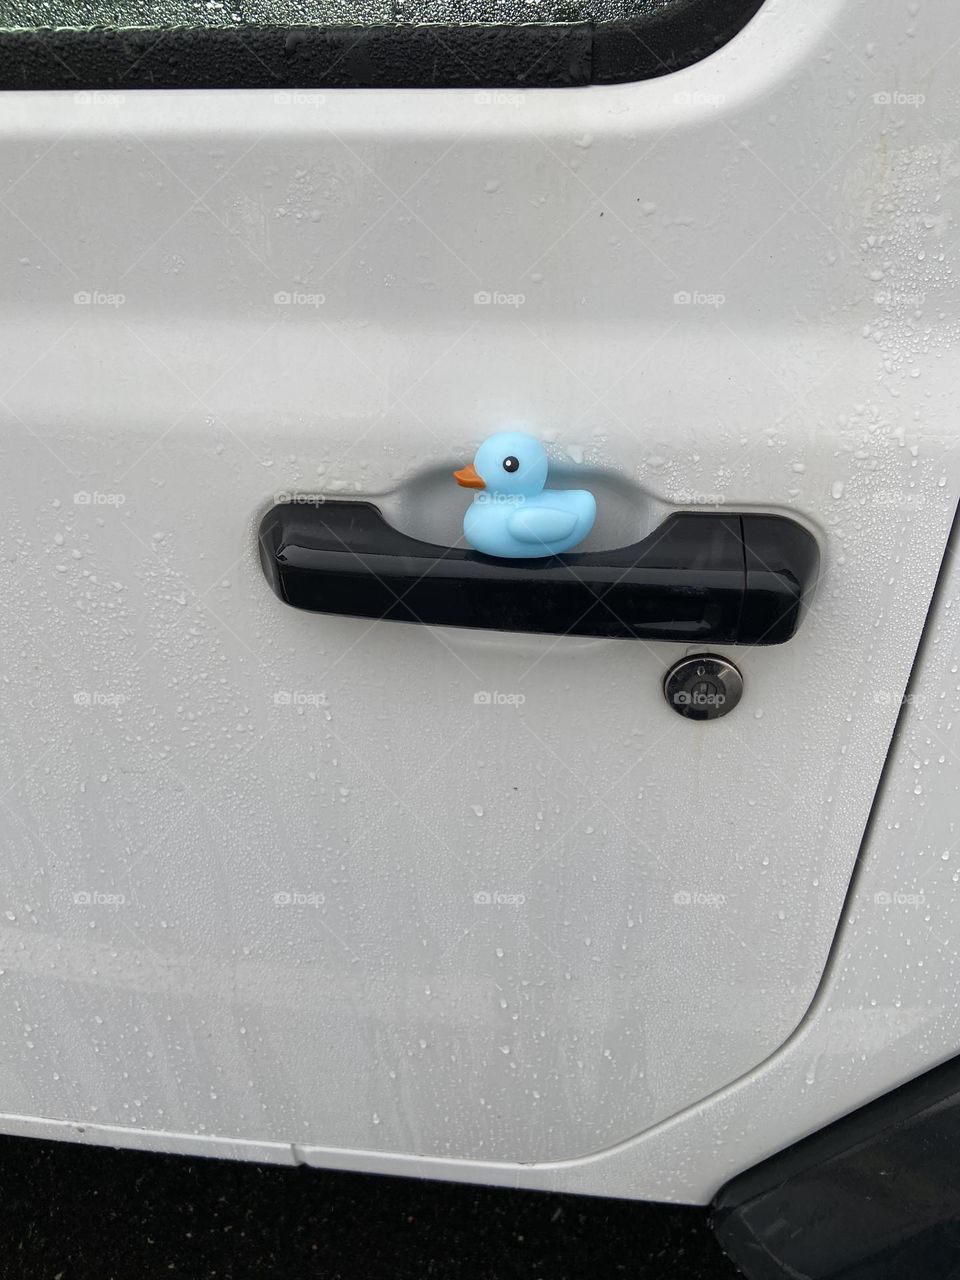 The door of my Jeep Wrangler with a blue rubber duck tucked in the door handle. I was “ducked” on a recent trip to a local shopping mall, Ocean County Mall in Toms River, NJ. I ran out to my car in the rain to find this little guy. #DuckDuckJeepNJ